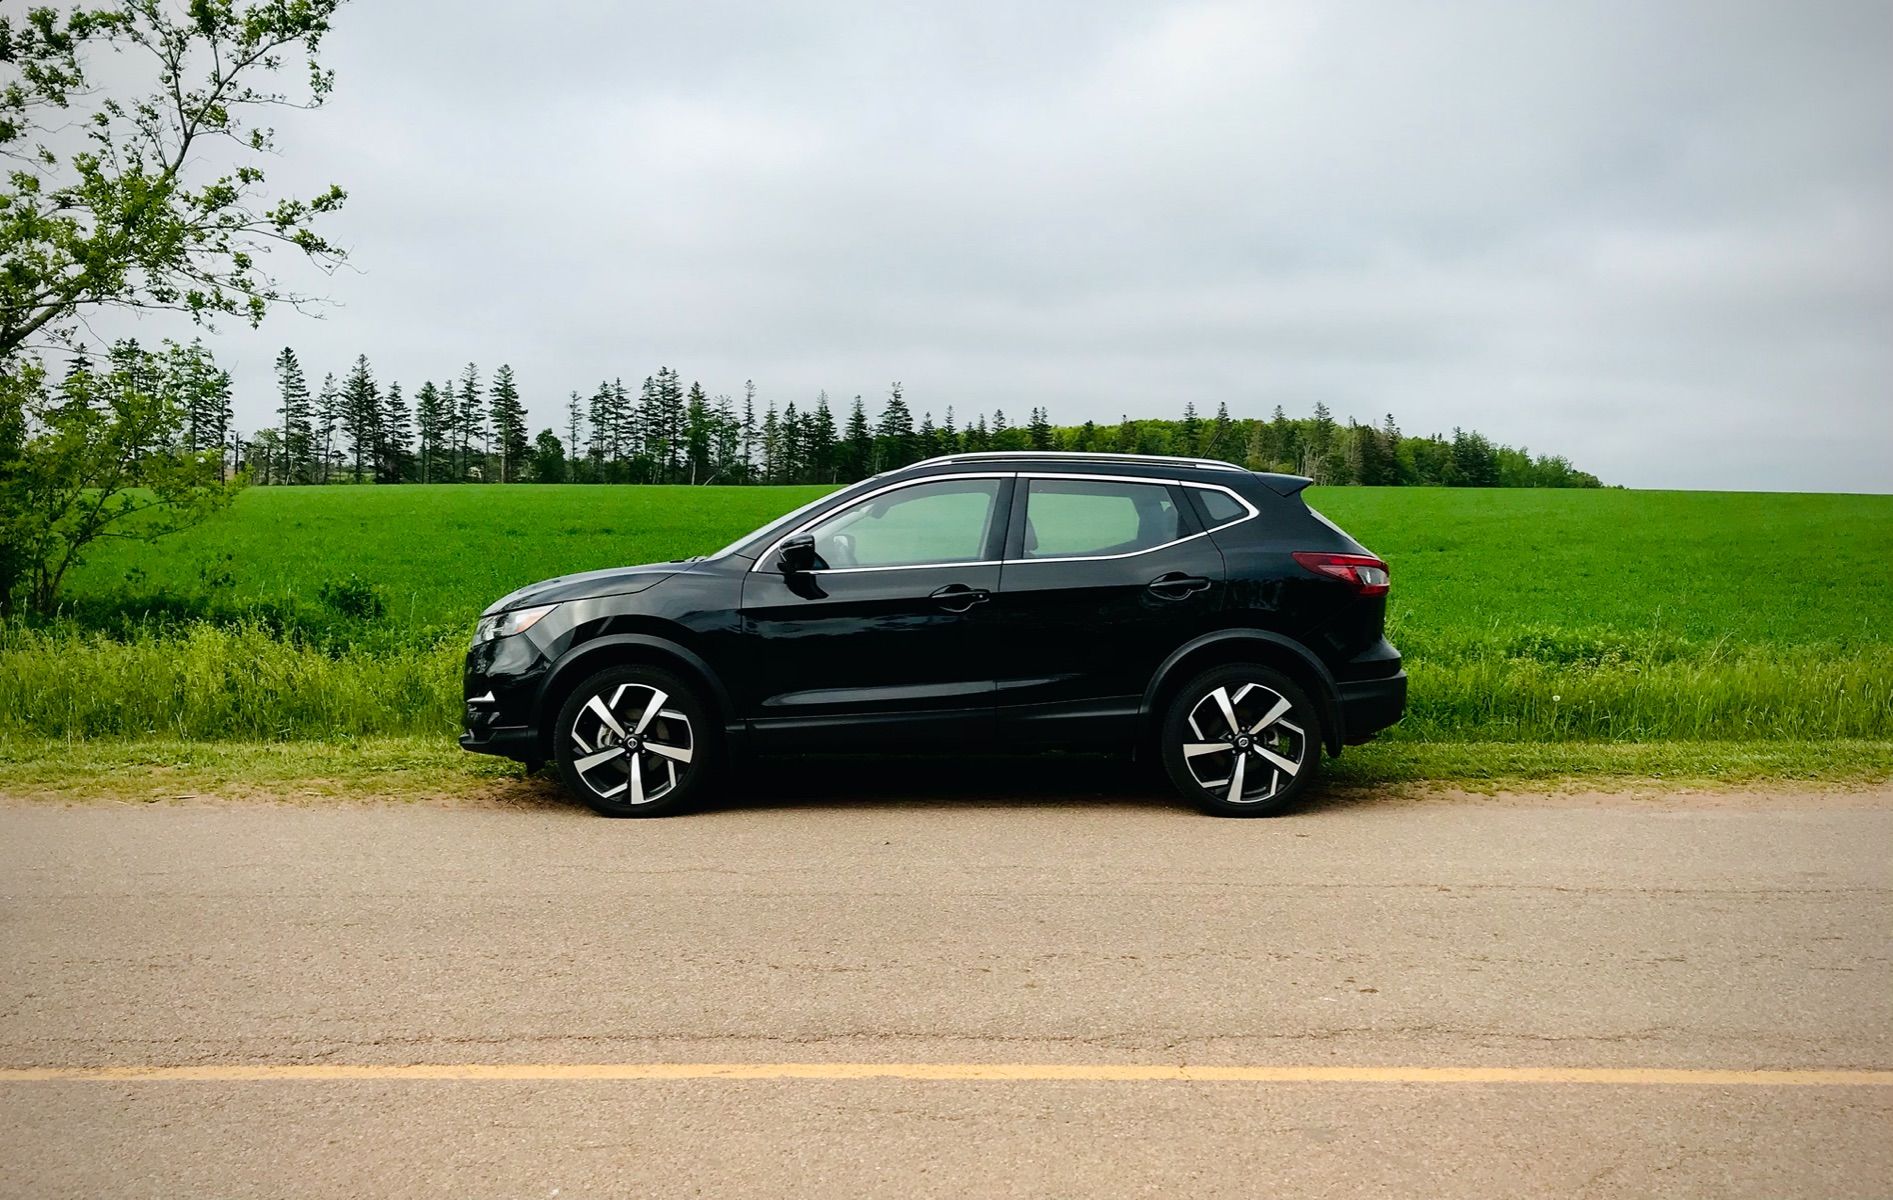 2020 Nissan Qashqai SL AWD Review: 10,000 Kilometres In PEI With Nissan's Hot-Selling Crossover